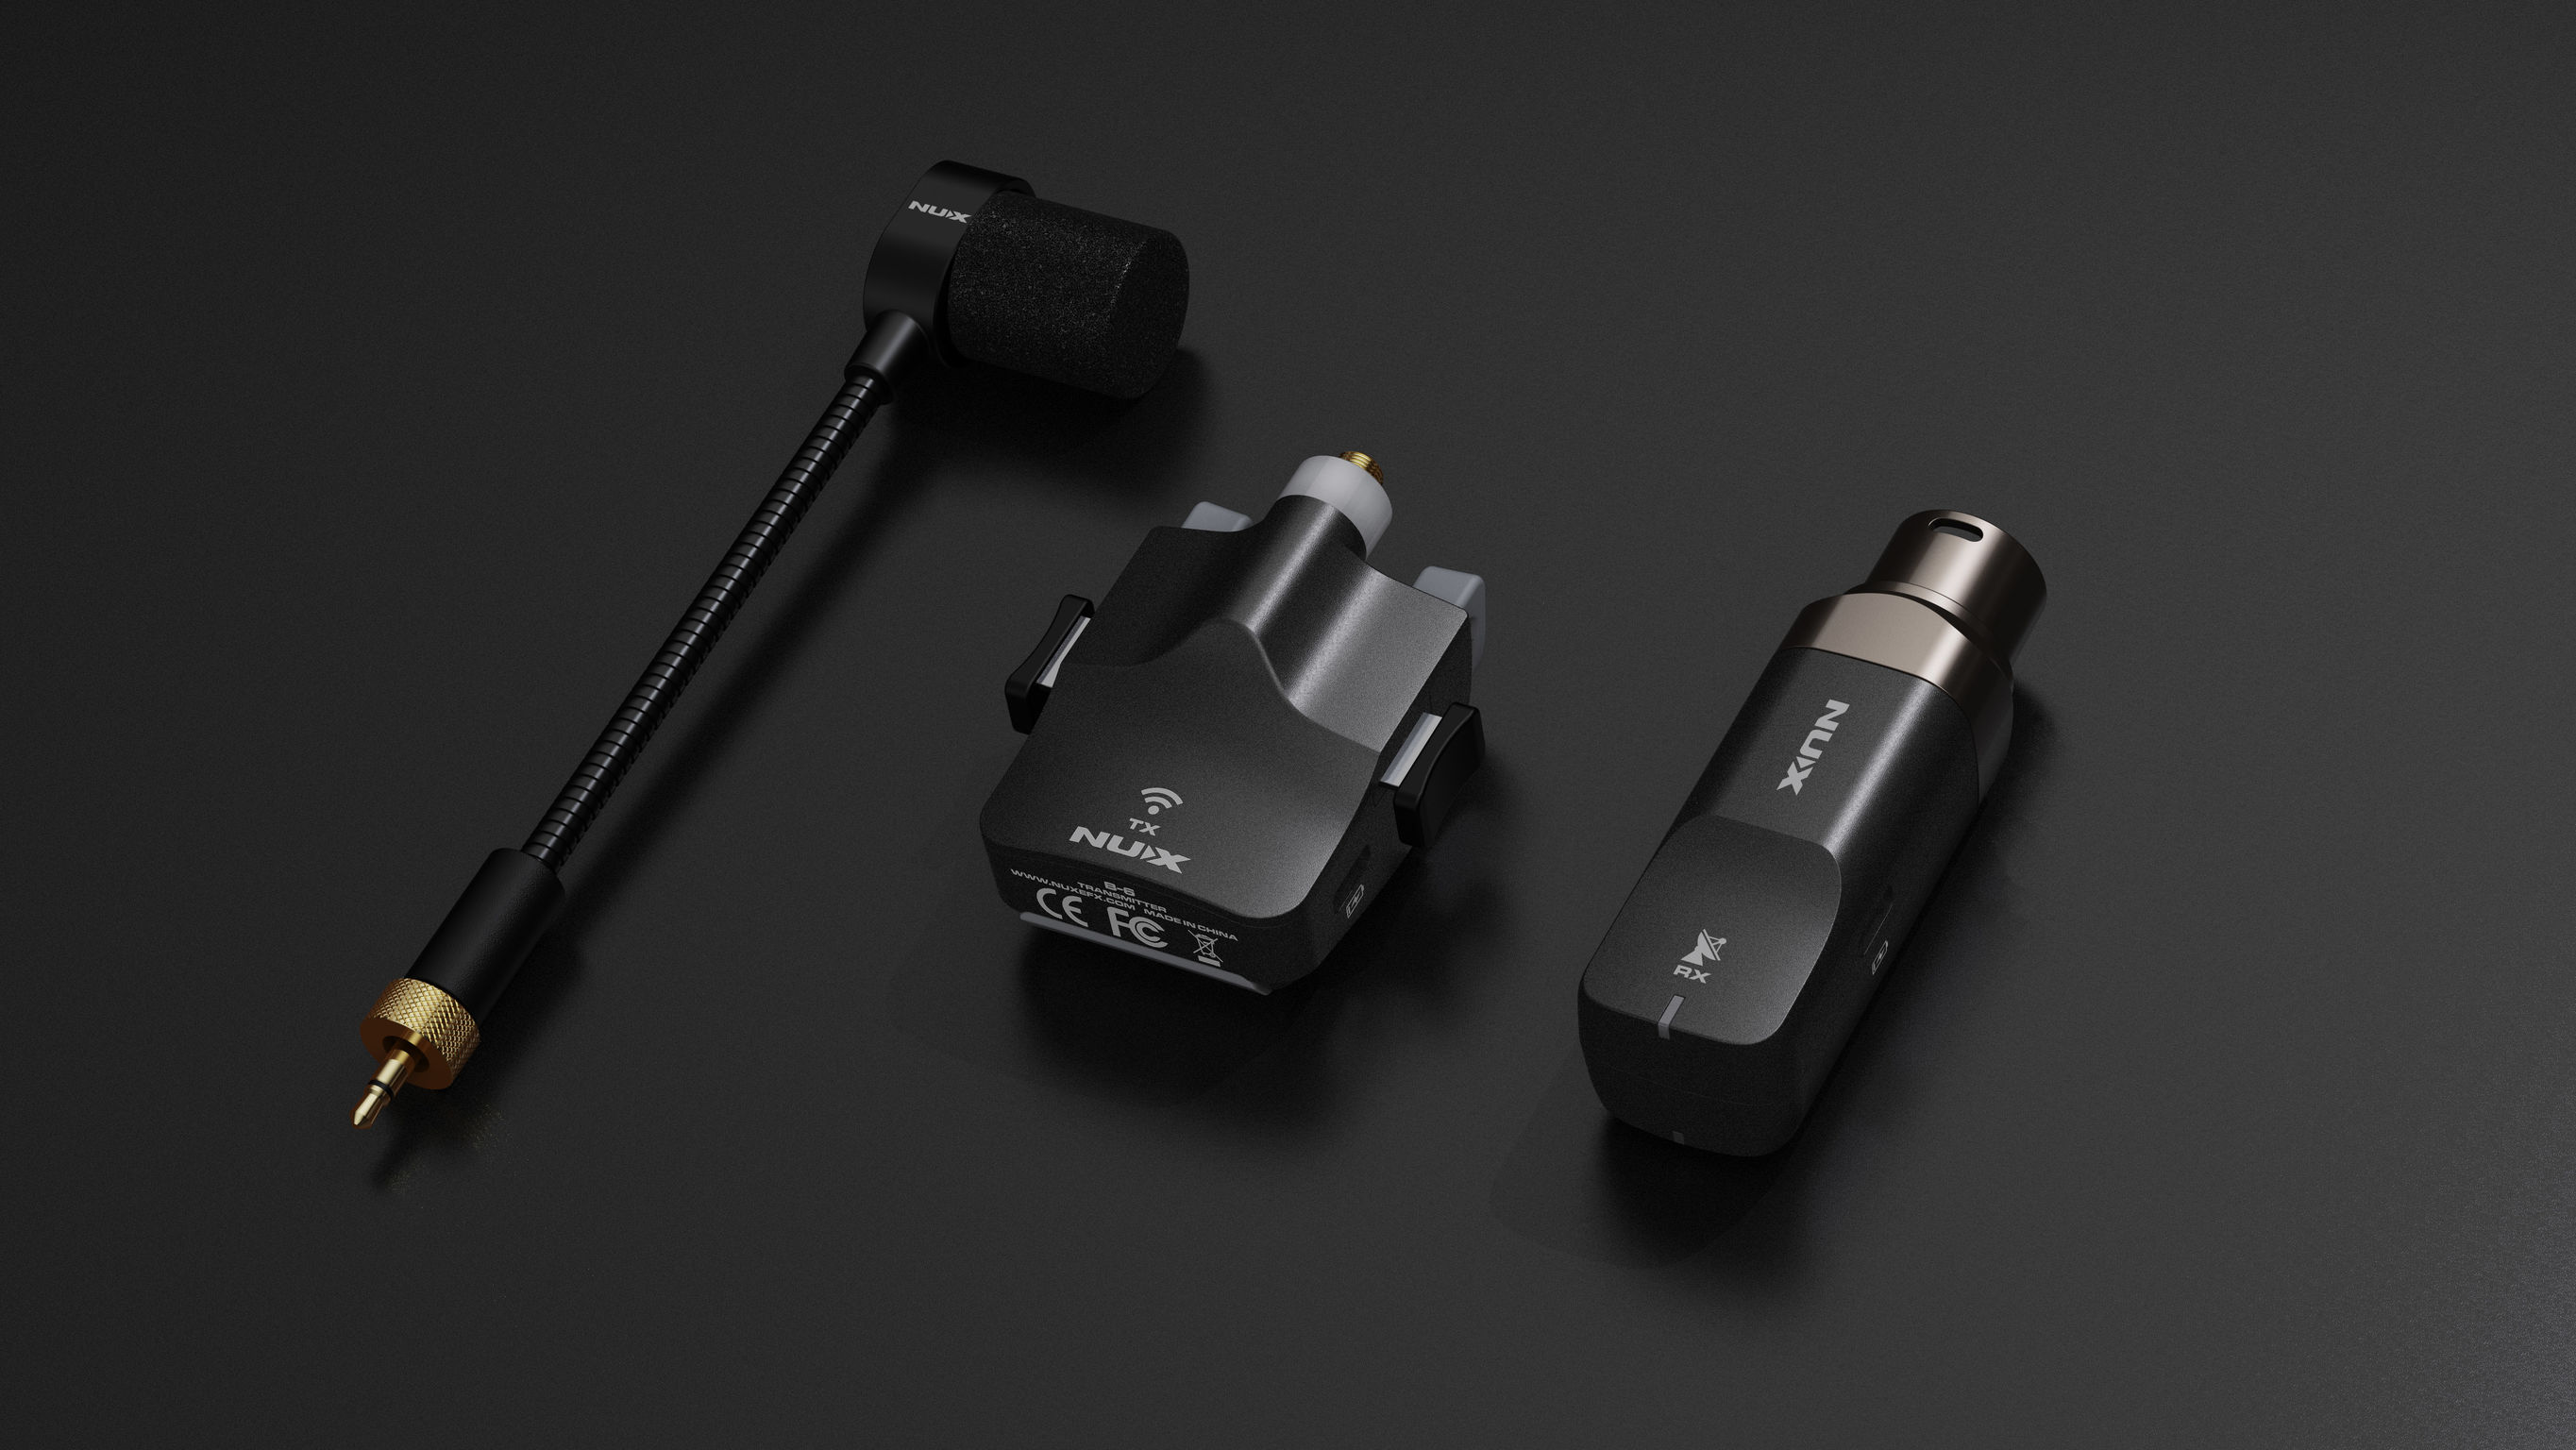 NUX B-6 Wireless System for Saxophone